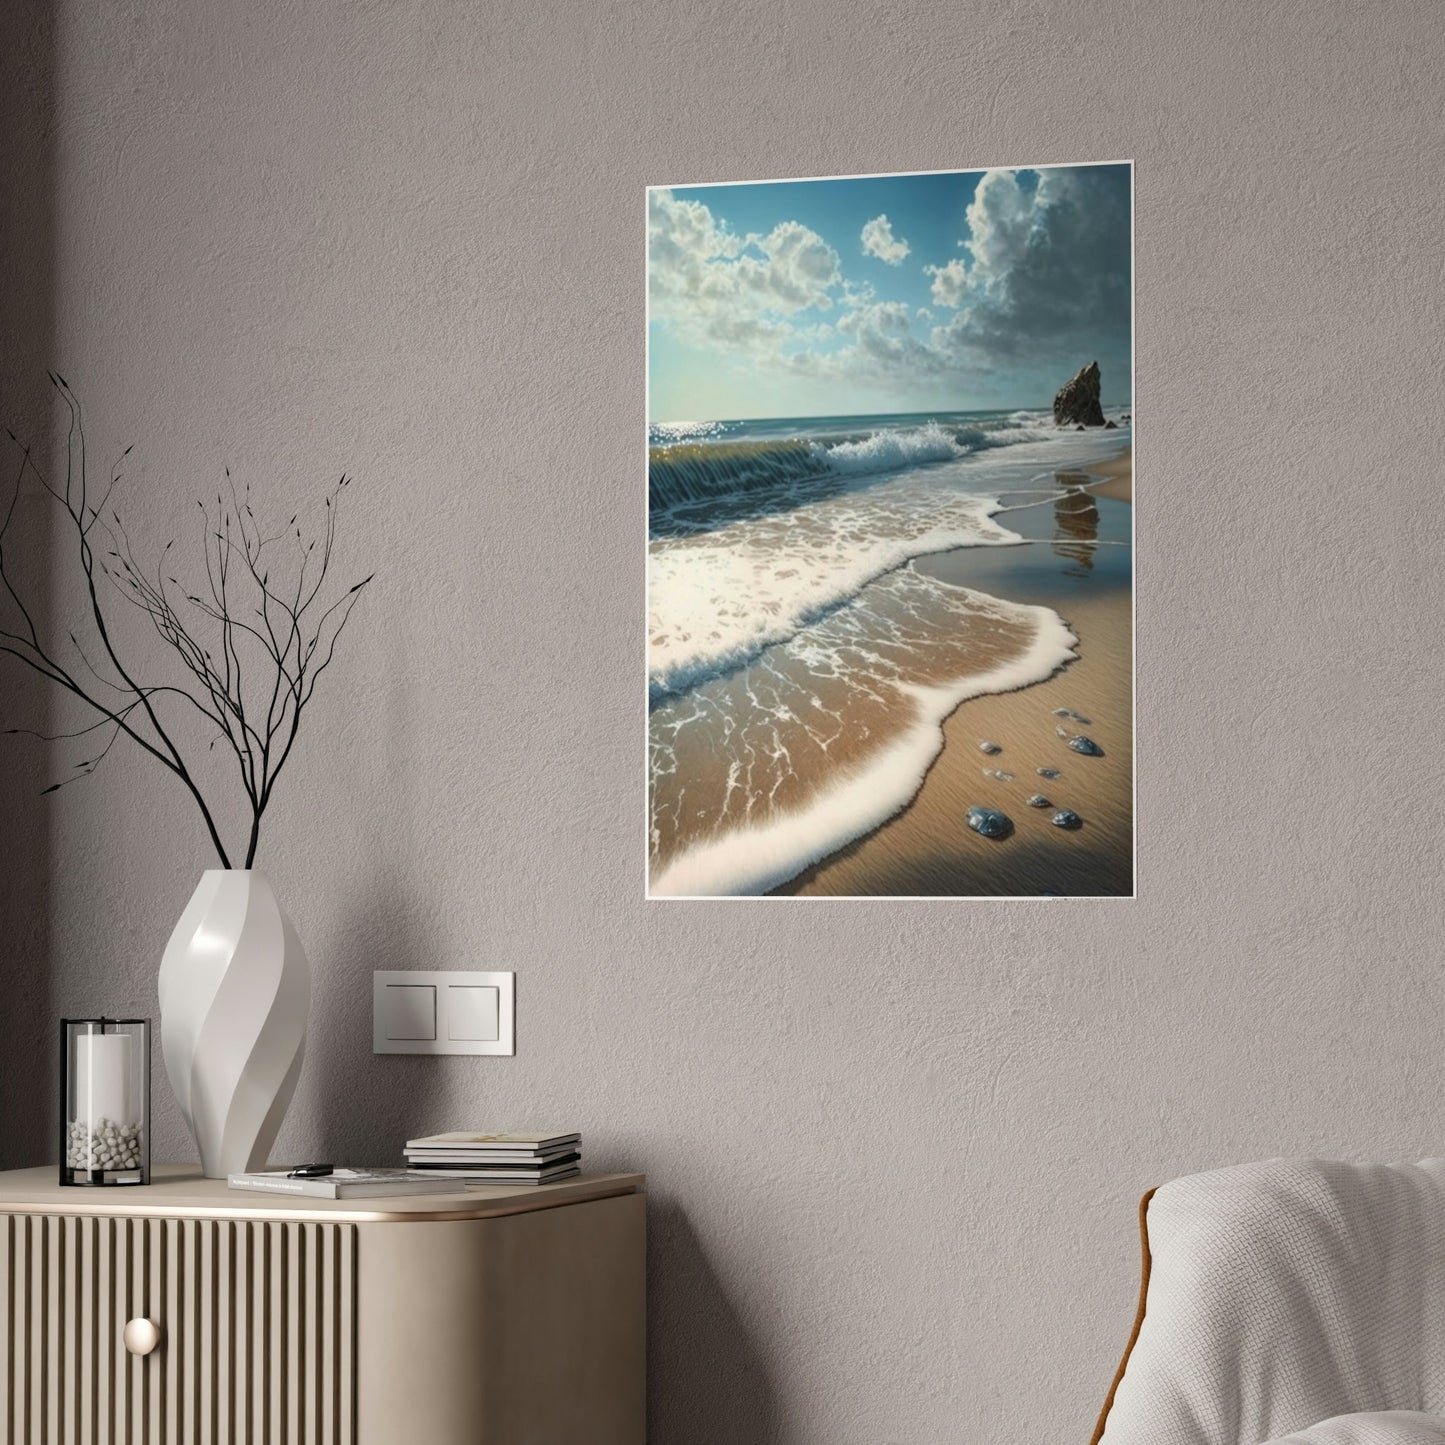 Seaside Escape: Artistic Framed Canvas & Poster Print of a Quiet Beach